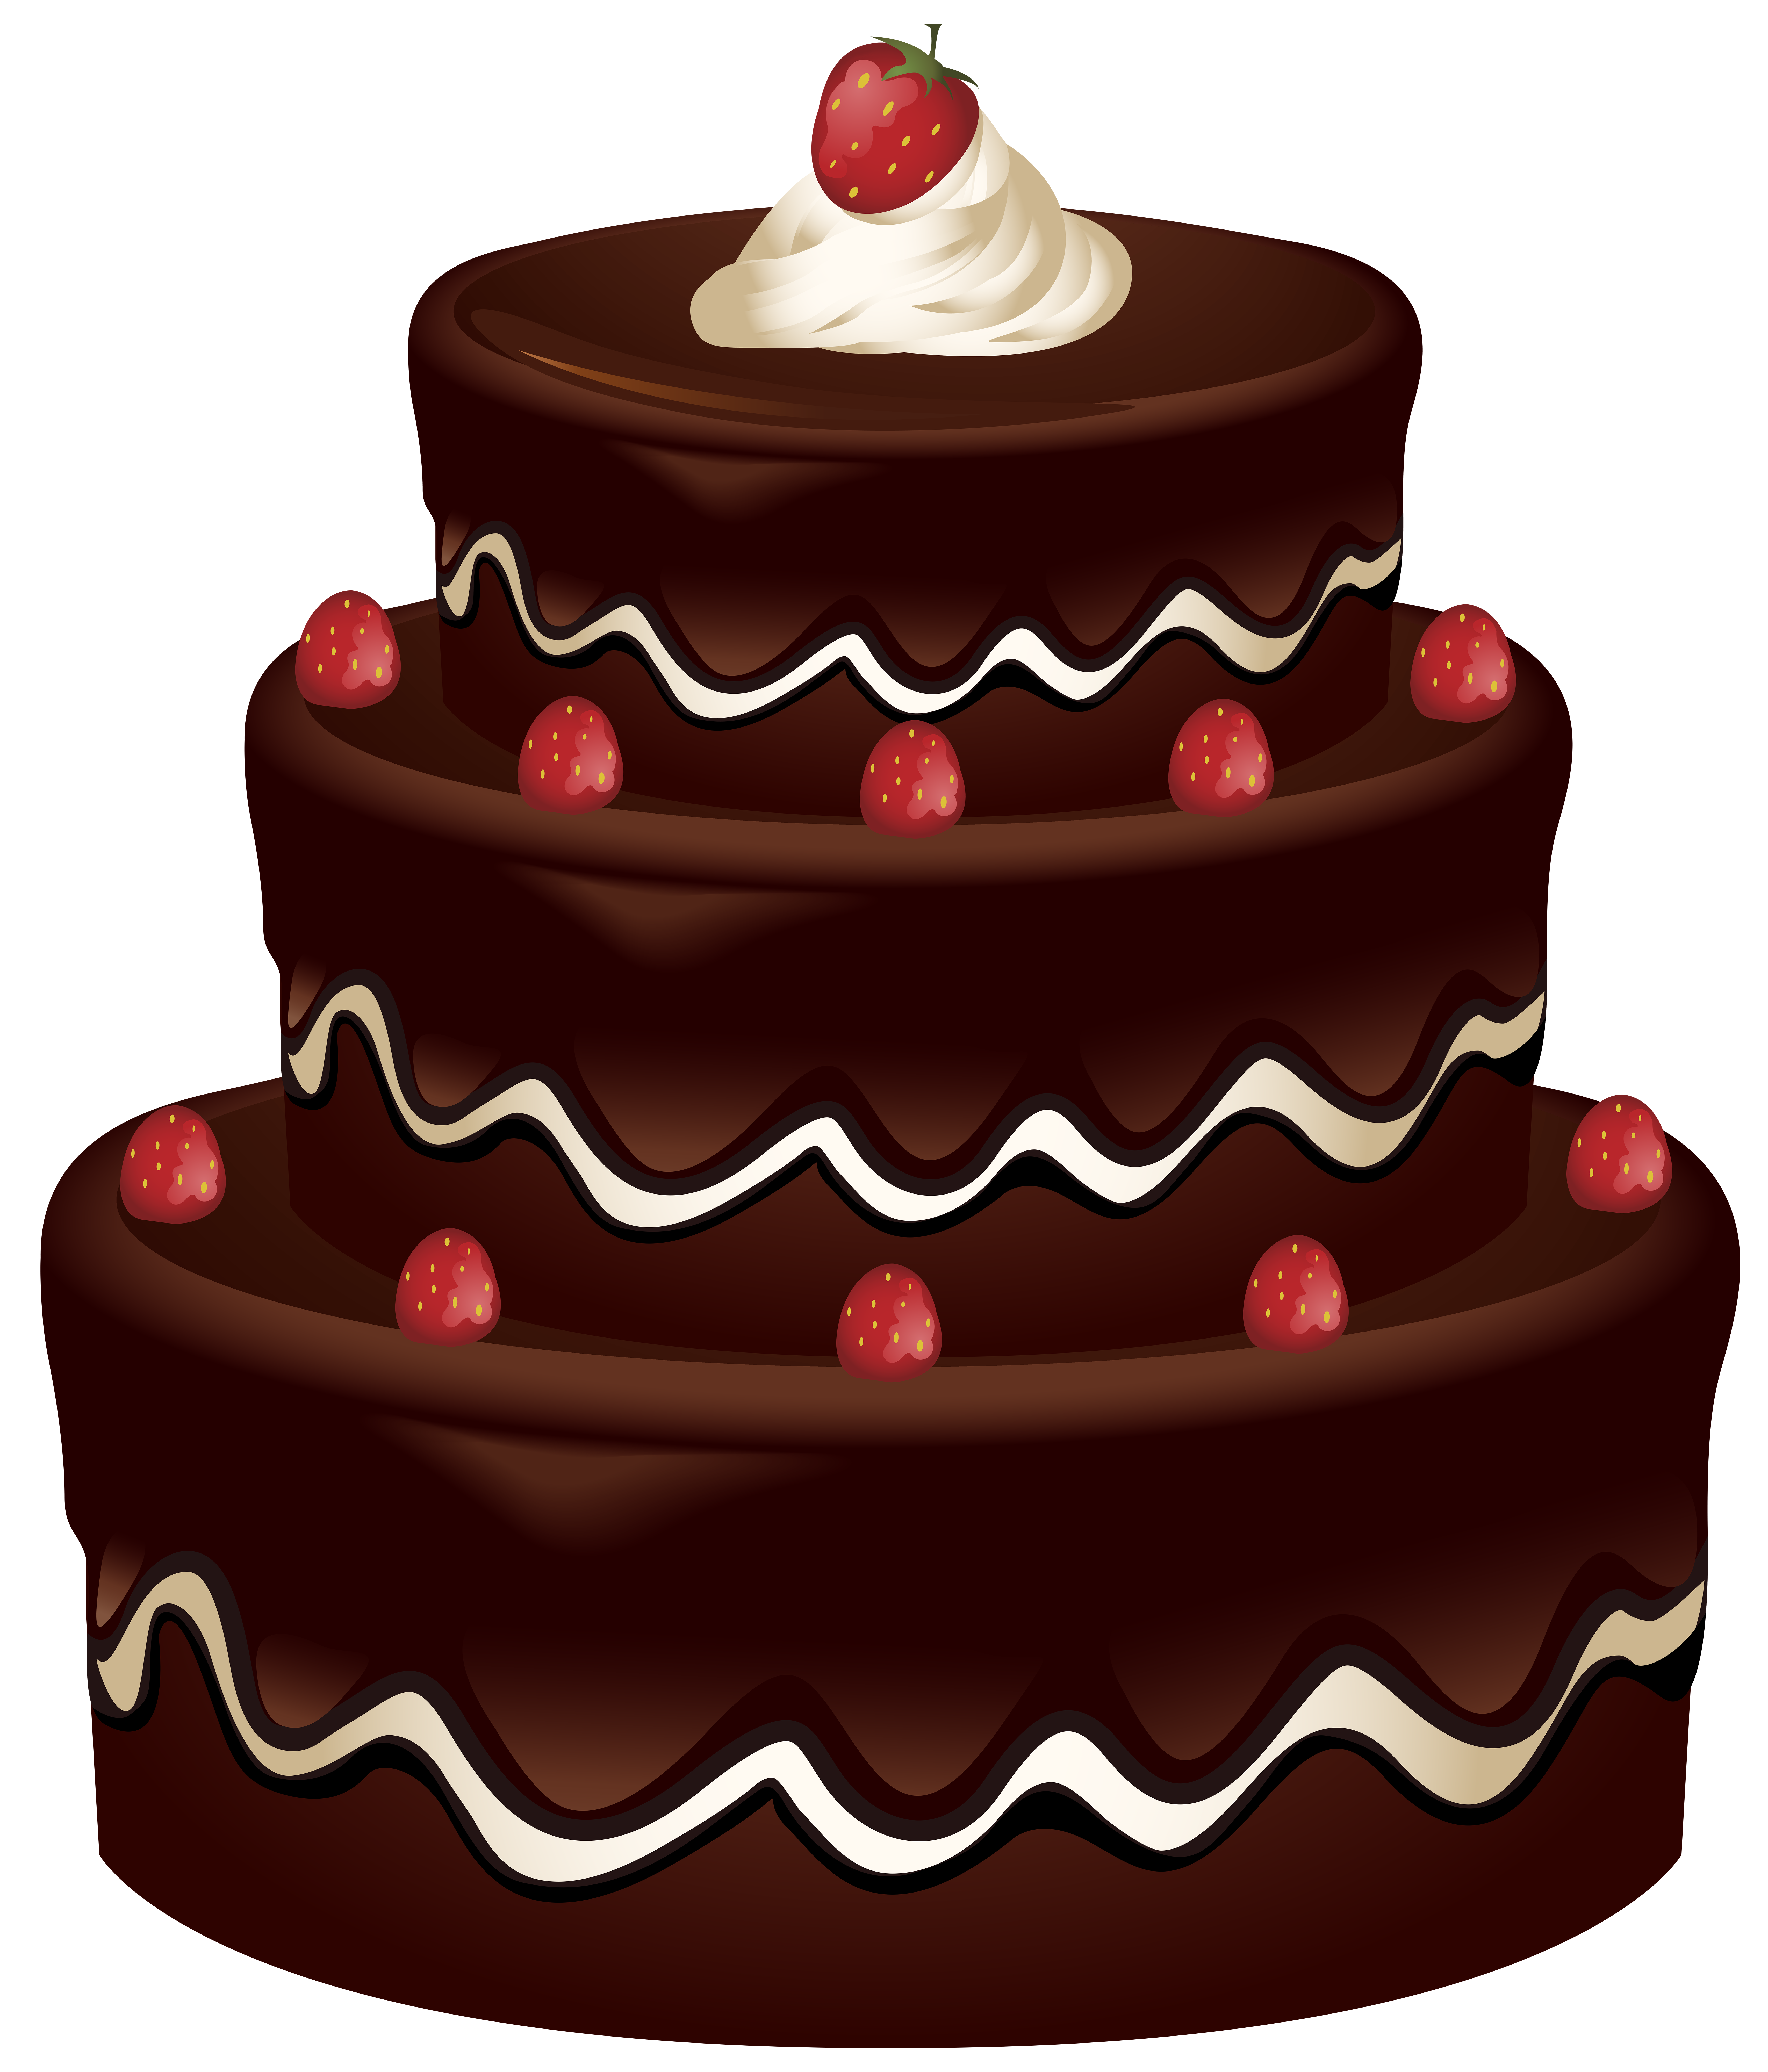 Cake Clip Art PNG Image | Gallery Yopriceville - High-Quality Images and Transparent ...